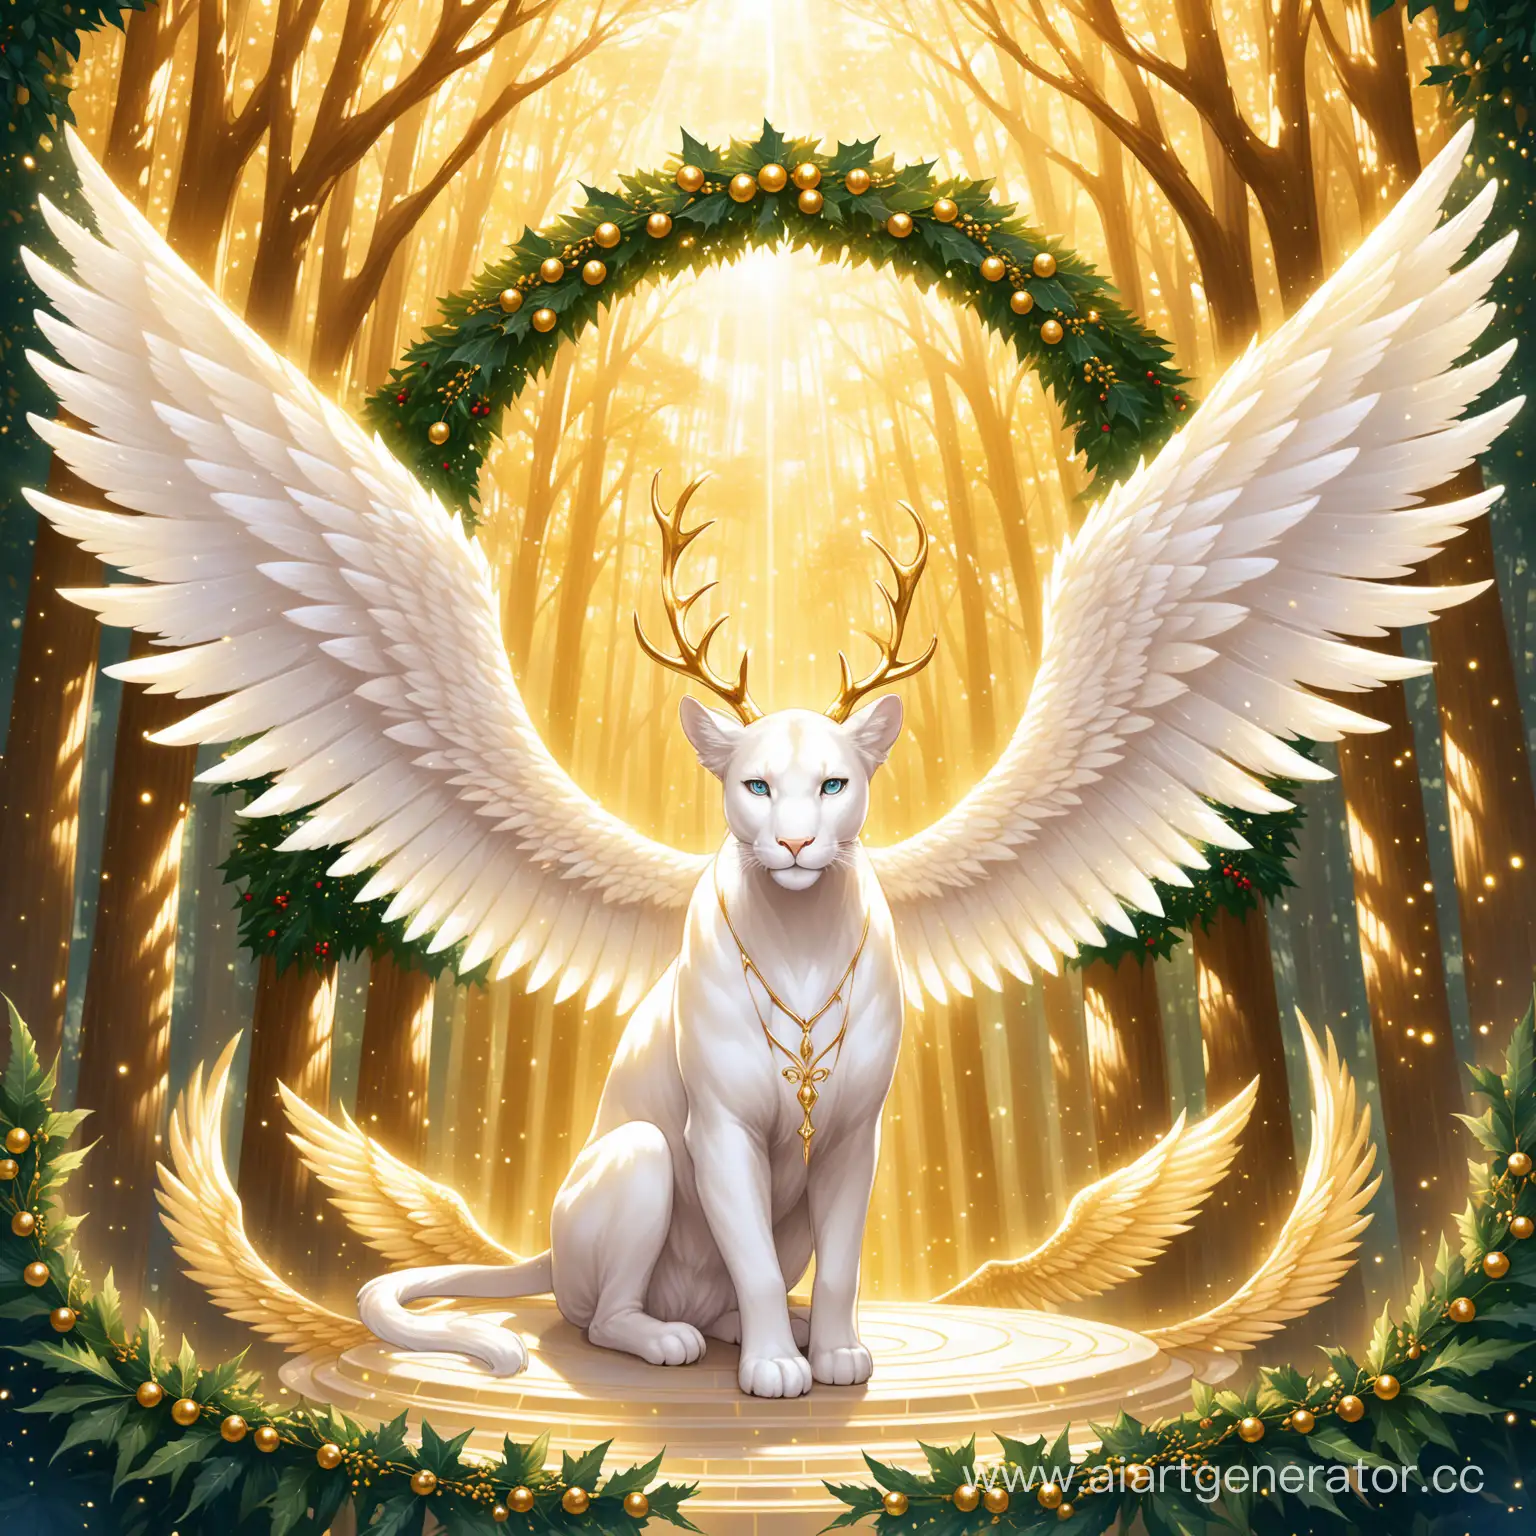 Ethereal-Albino-Sacred-Animal-with-Panther-and-Deer-Motif-in-Angelic-Forest